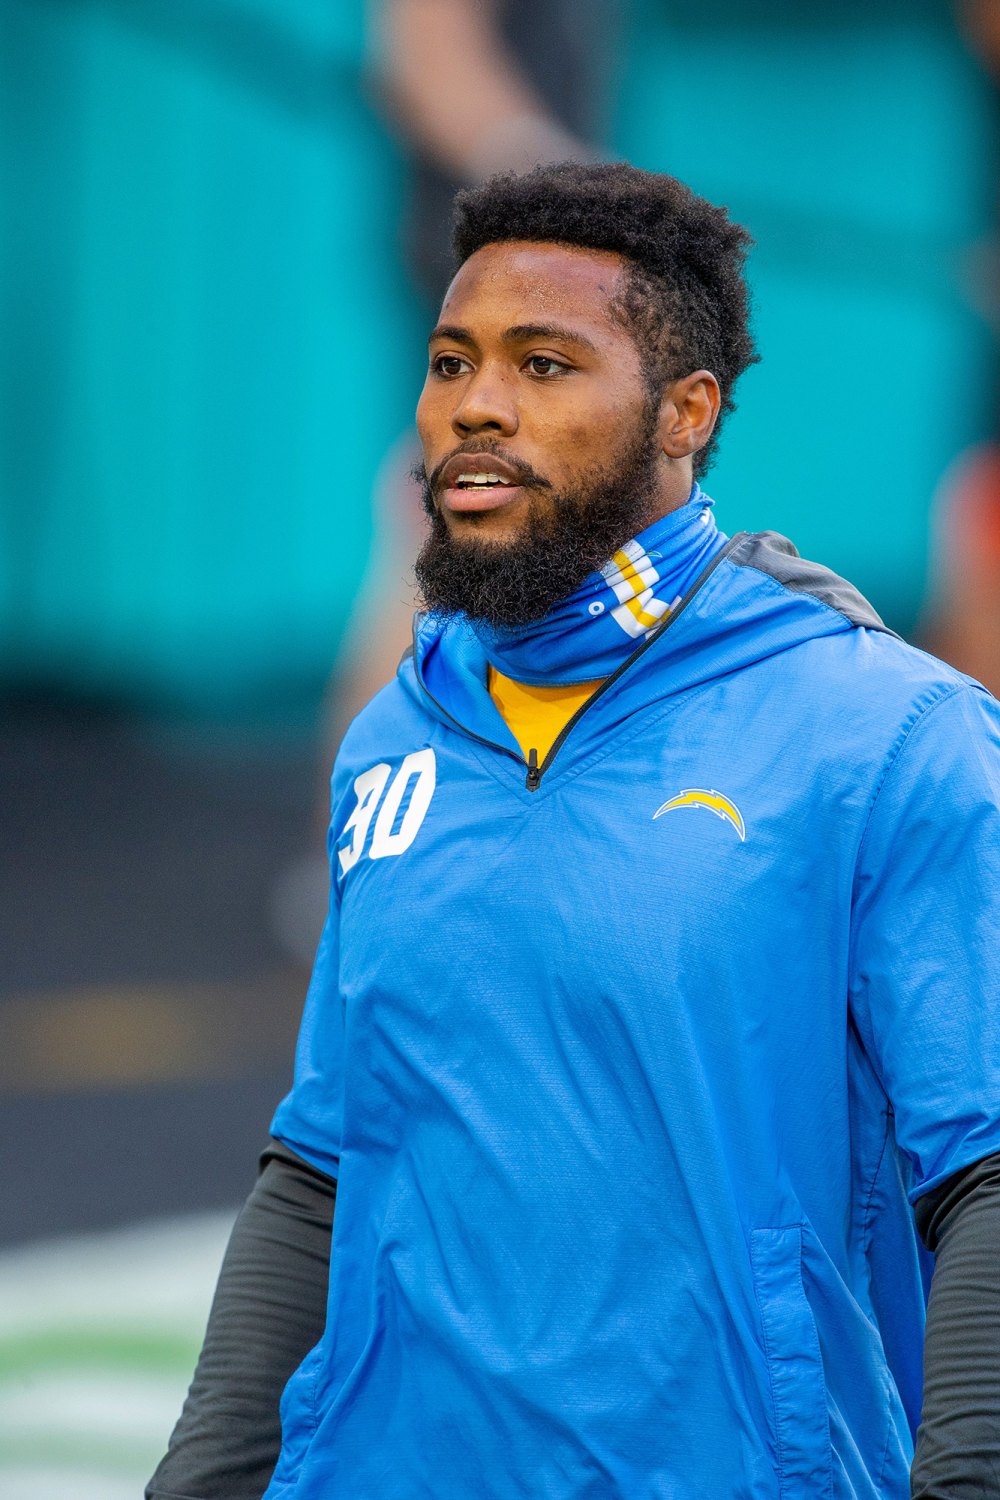 5 Things to Know About Late NFL Player Jessie Lemonier - 462 Chargers Dolphins Football, Miami Gardens, United States - 15 Nov 2020